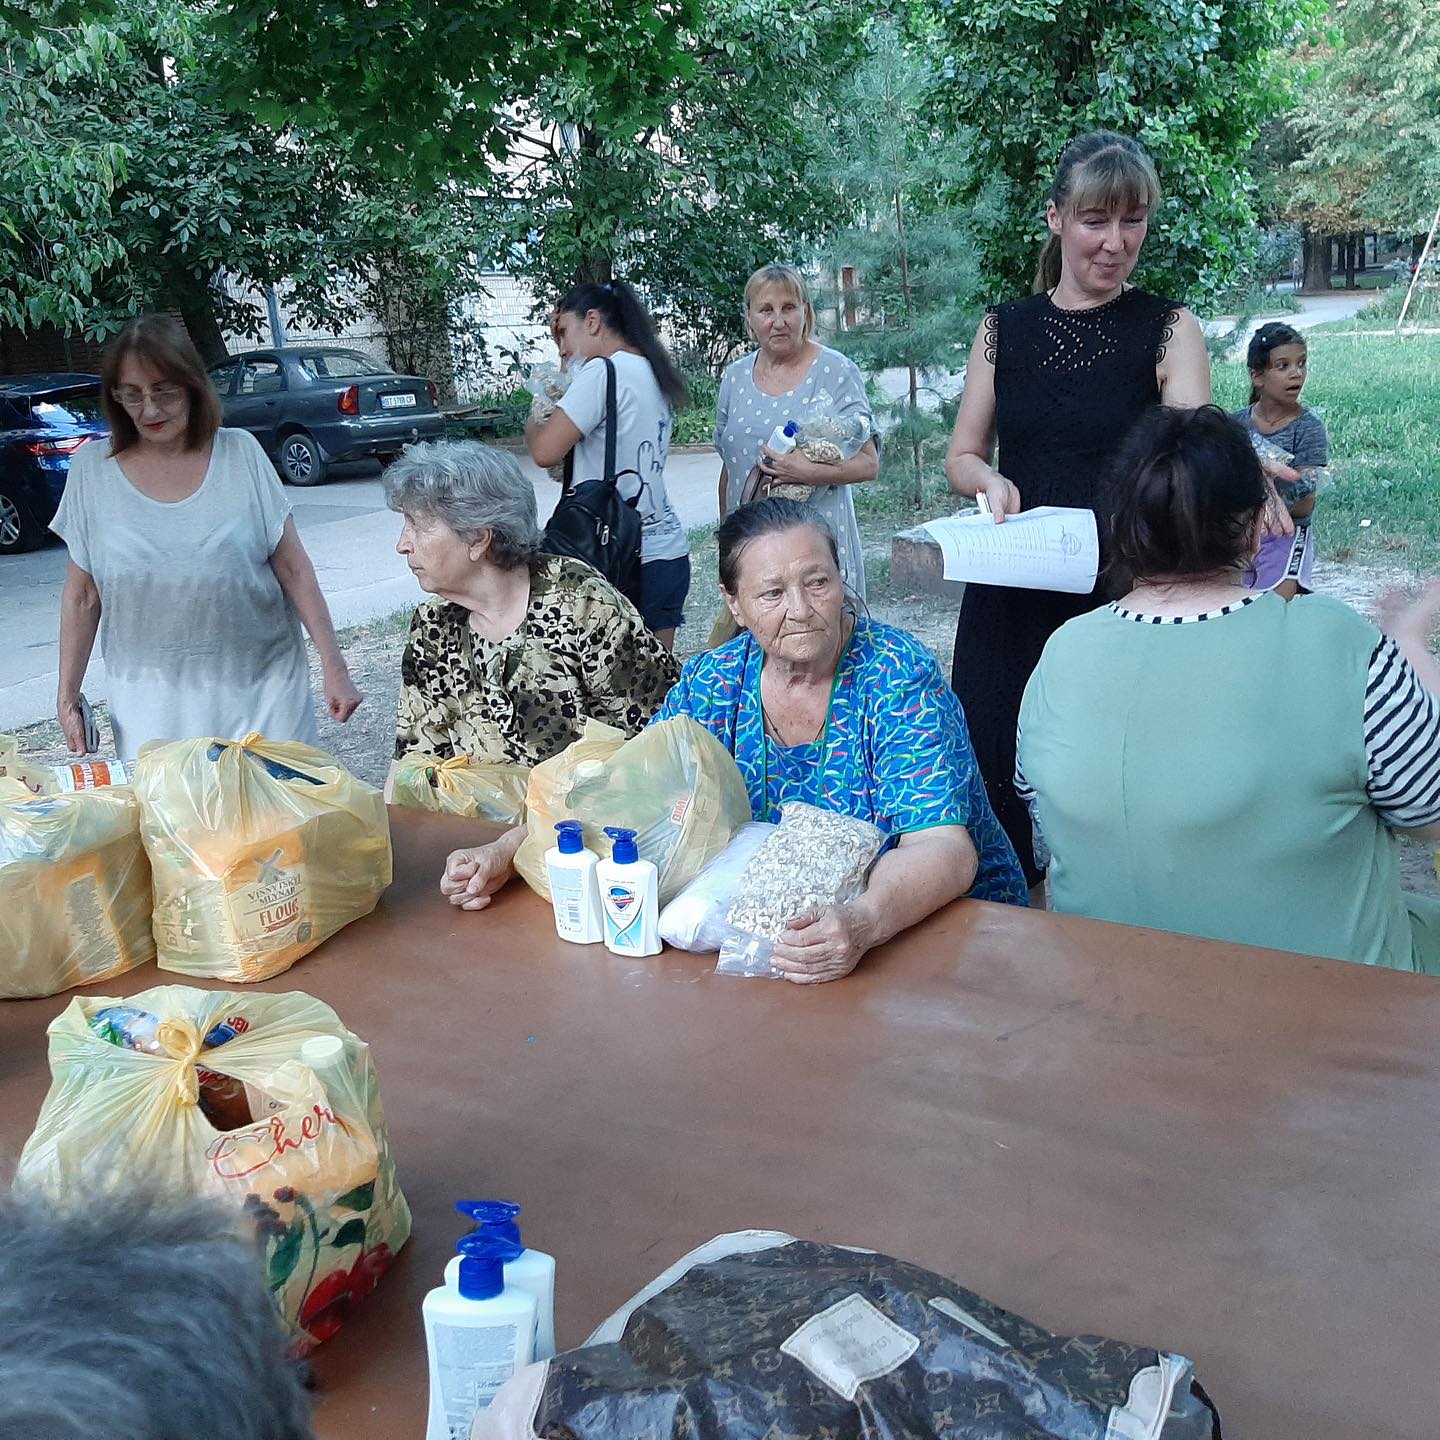 A group of people sitting around a table with bags of food.